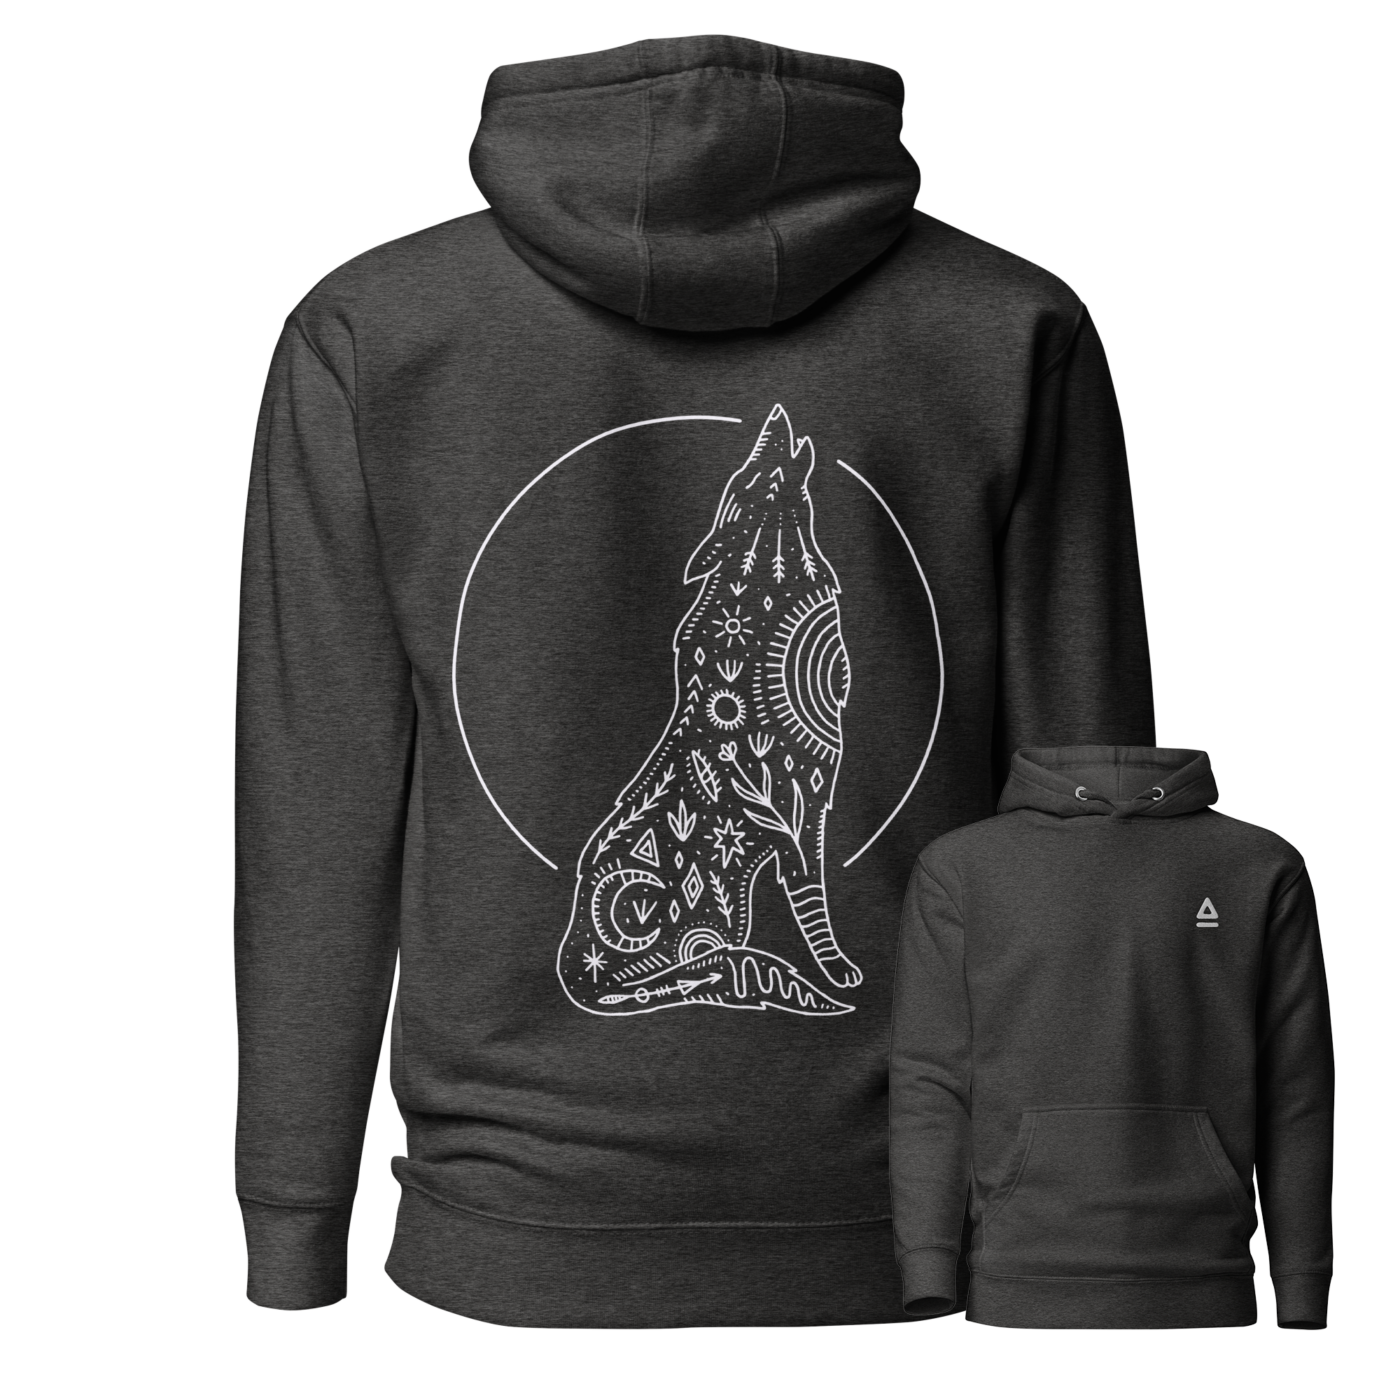 Moon Song Hoodie Features